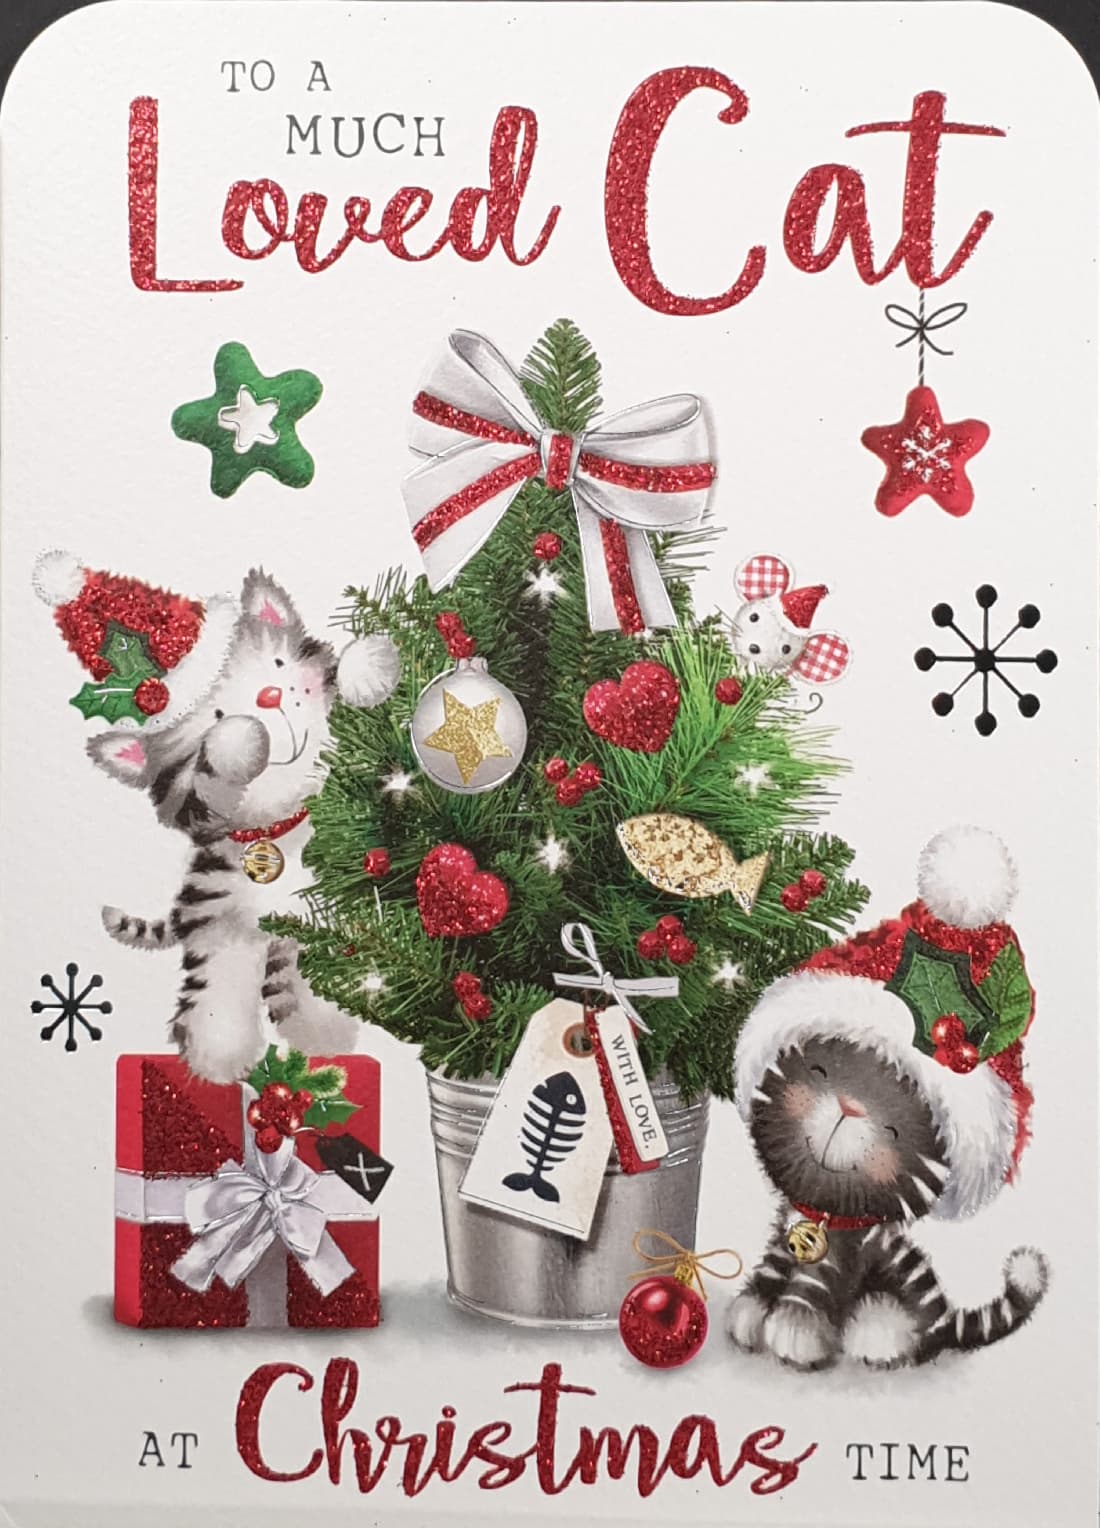 Cat Christmas Card - To a Much Loved Cat / Cats Decorating Christmss Tree